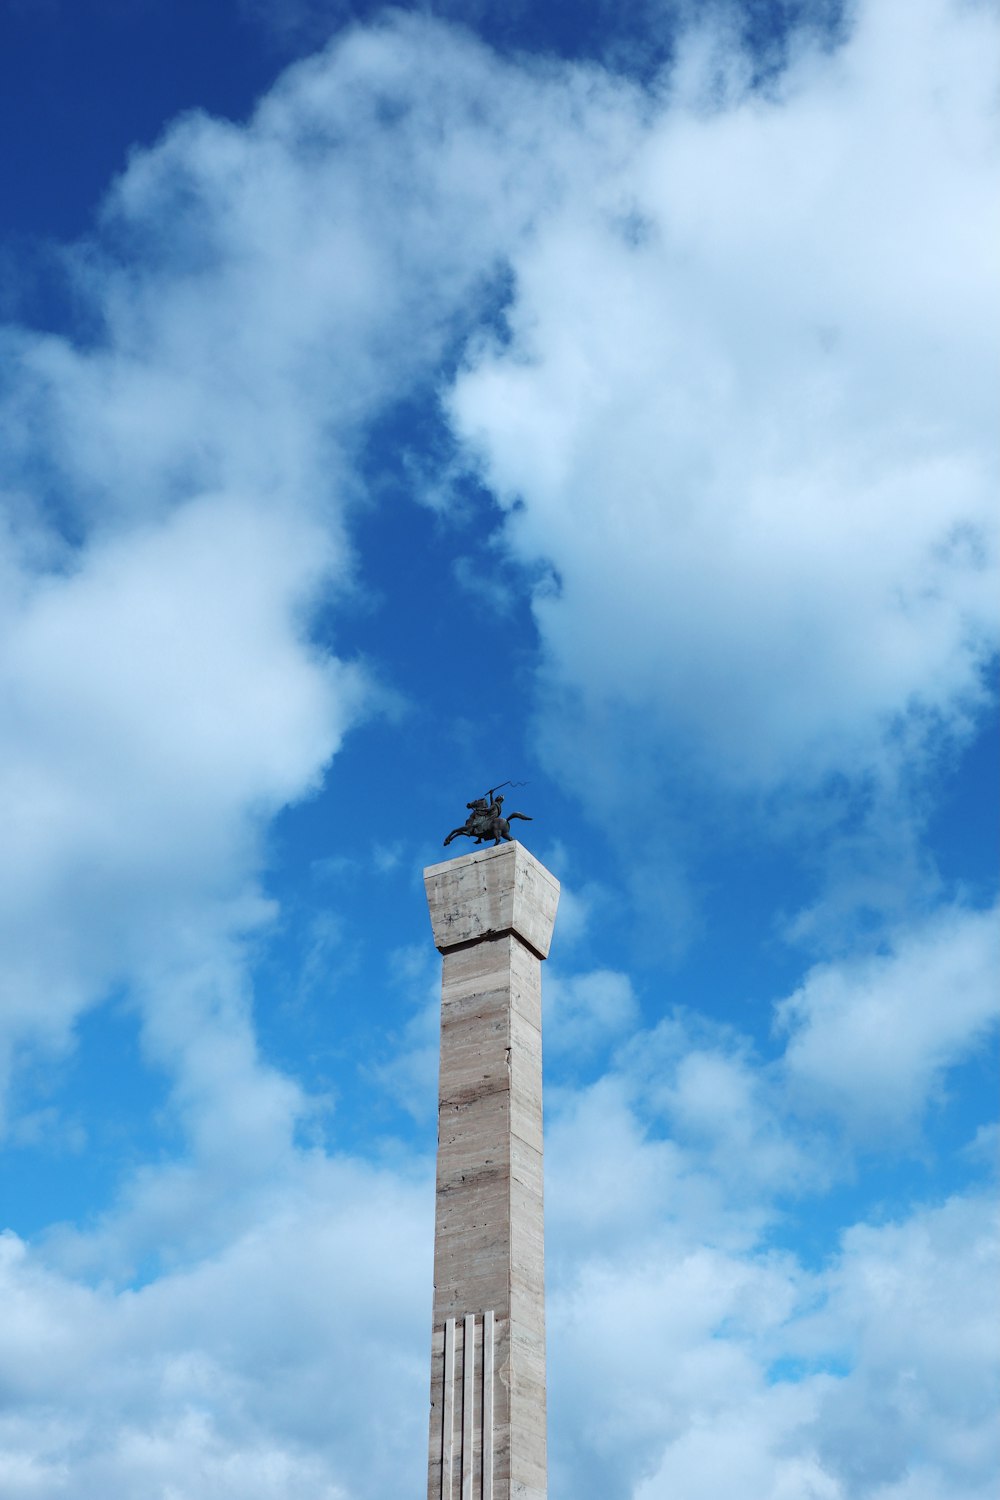 a tall monument with a bird sitting on top of it